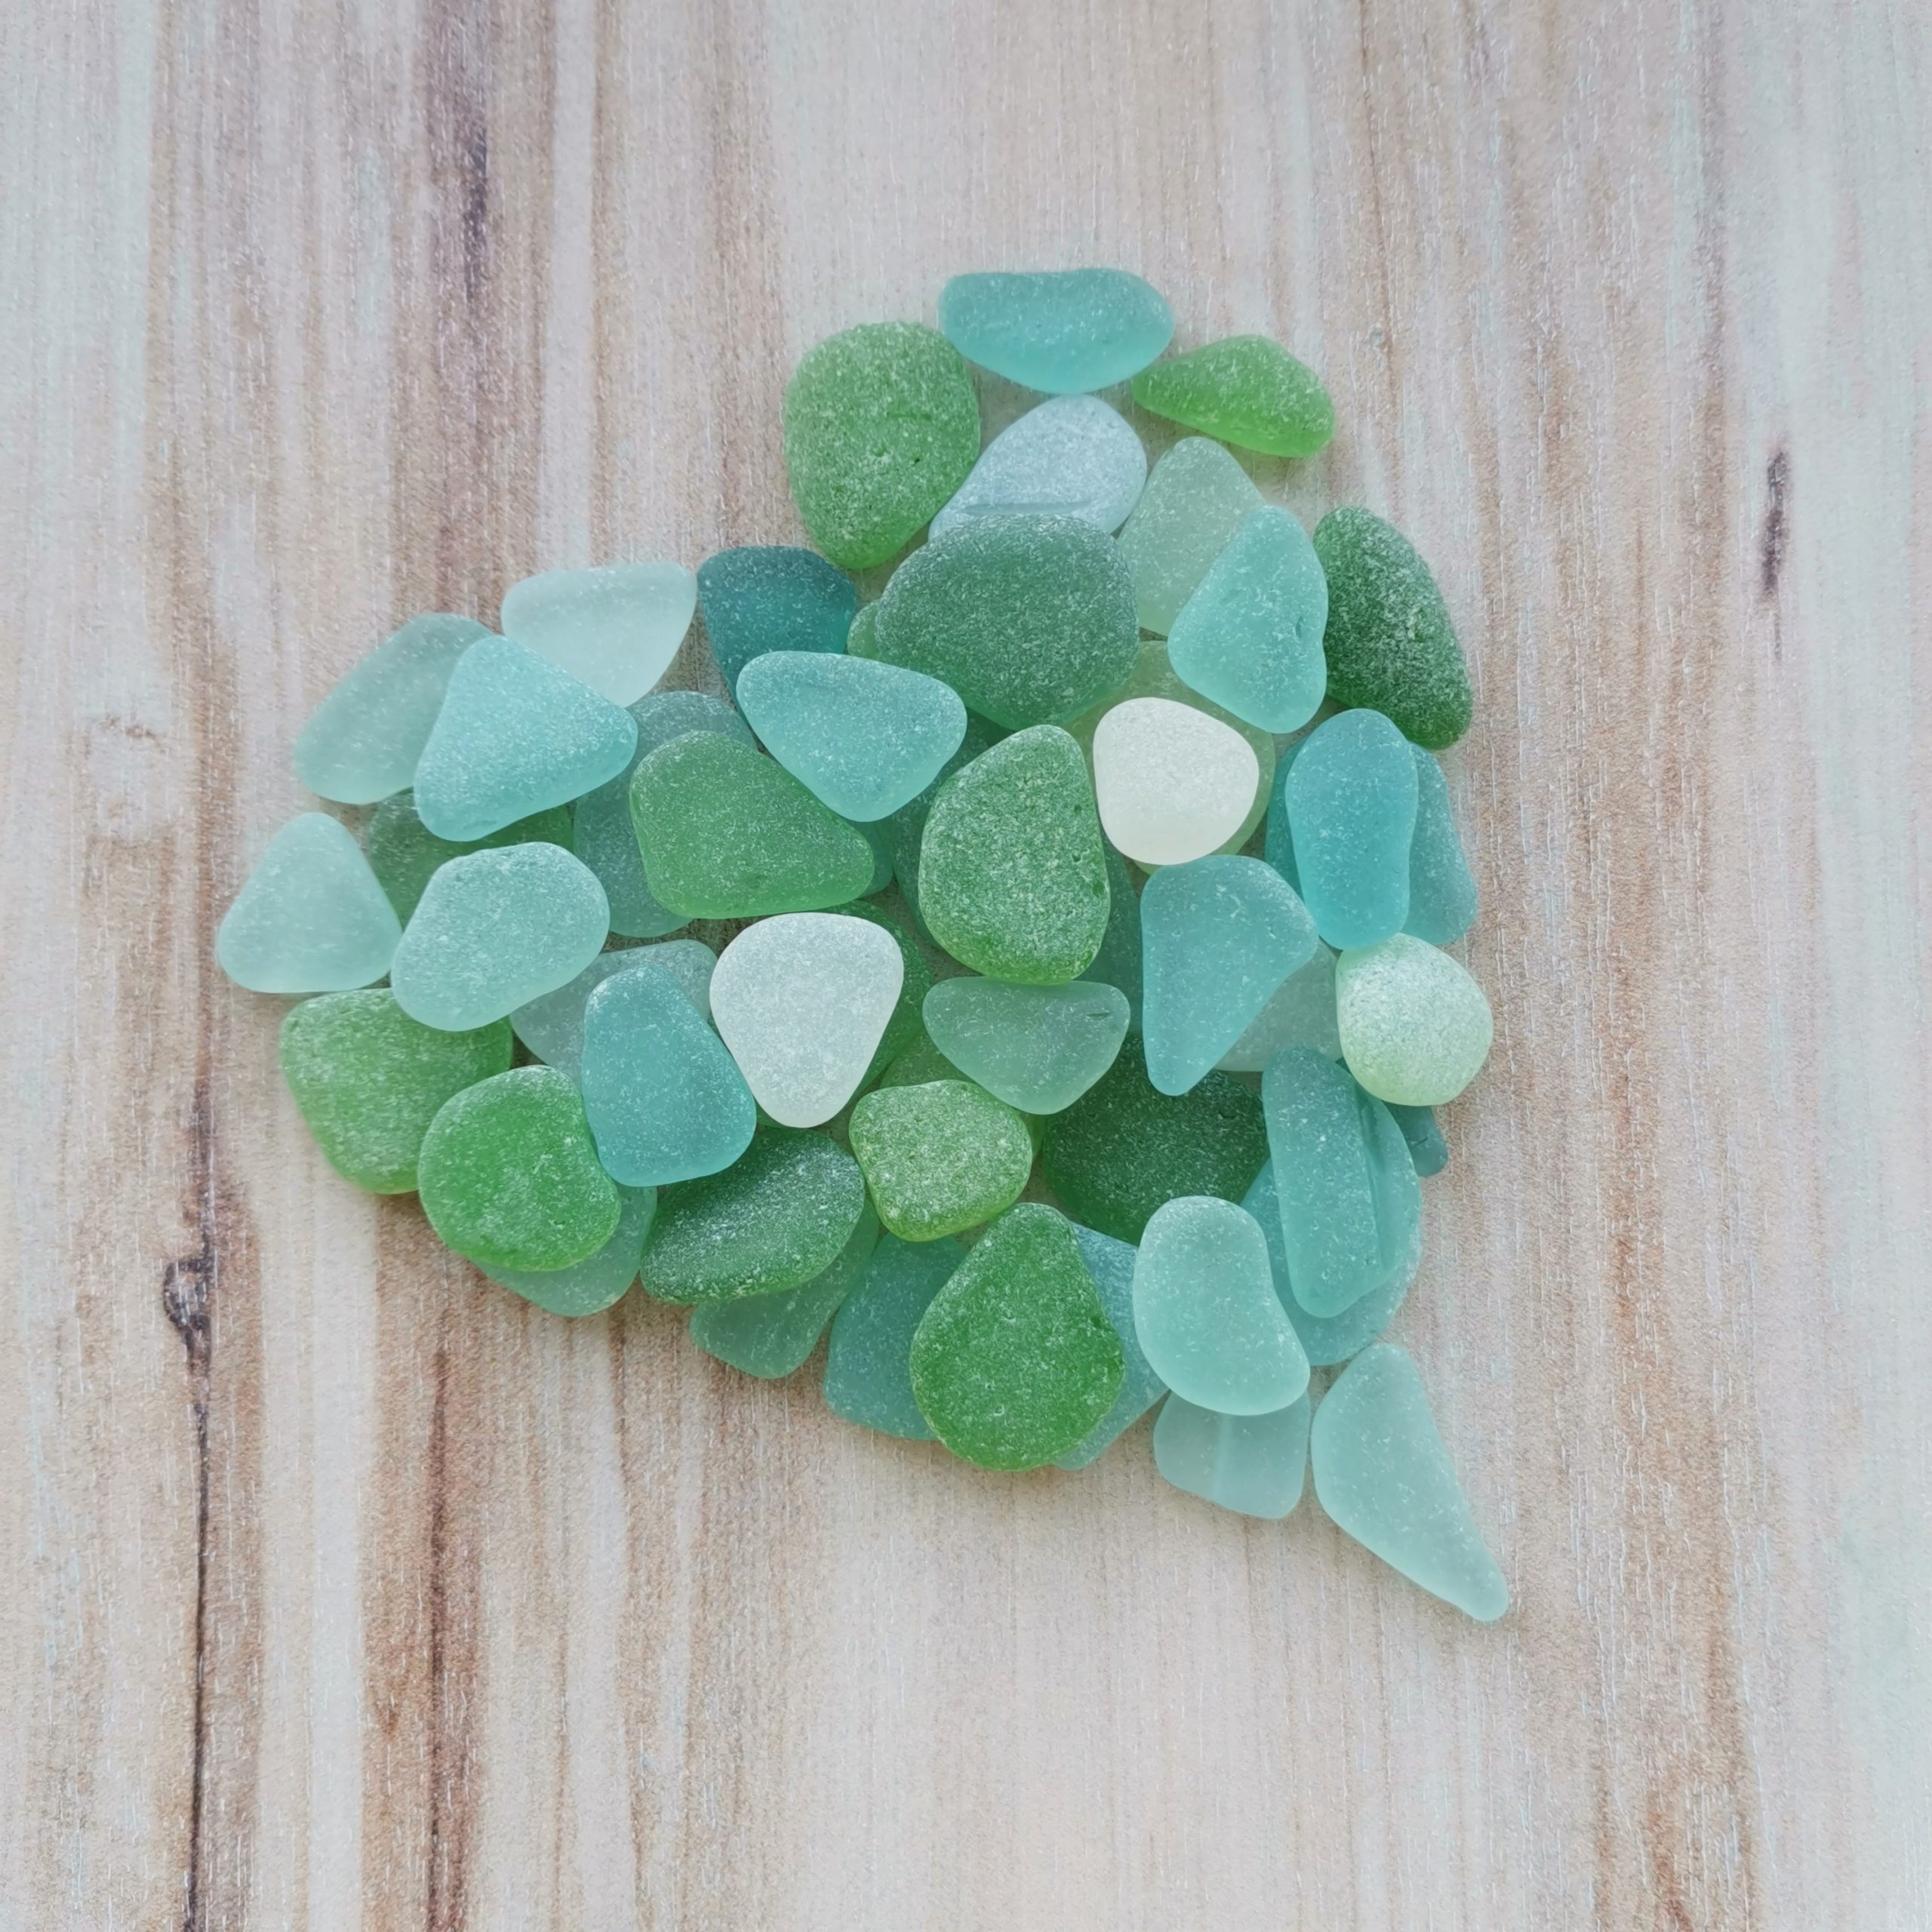 Authentic sea glass for jewelry 7 oz 50 pcs